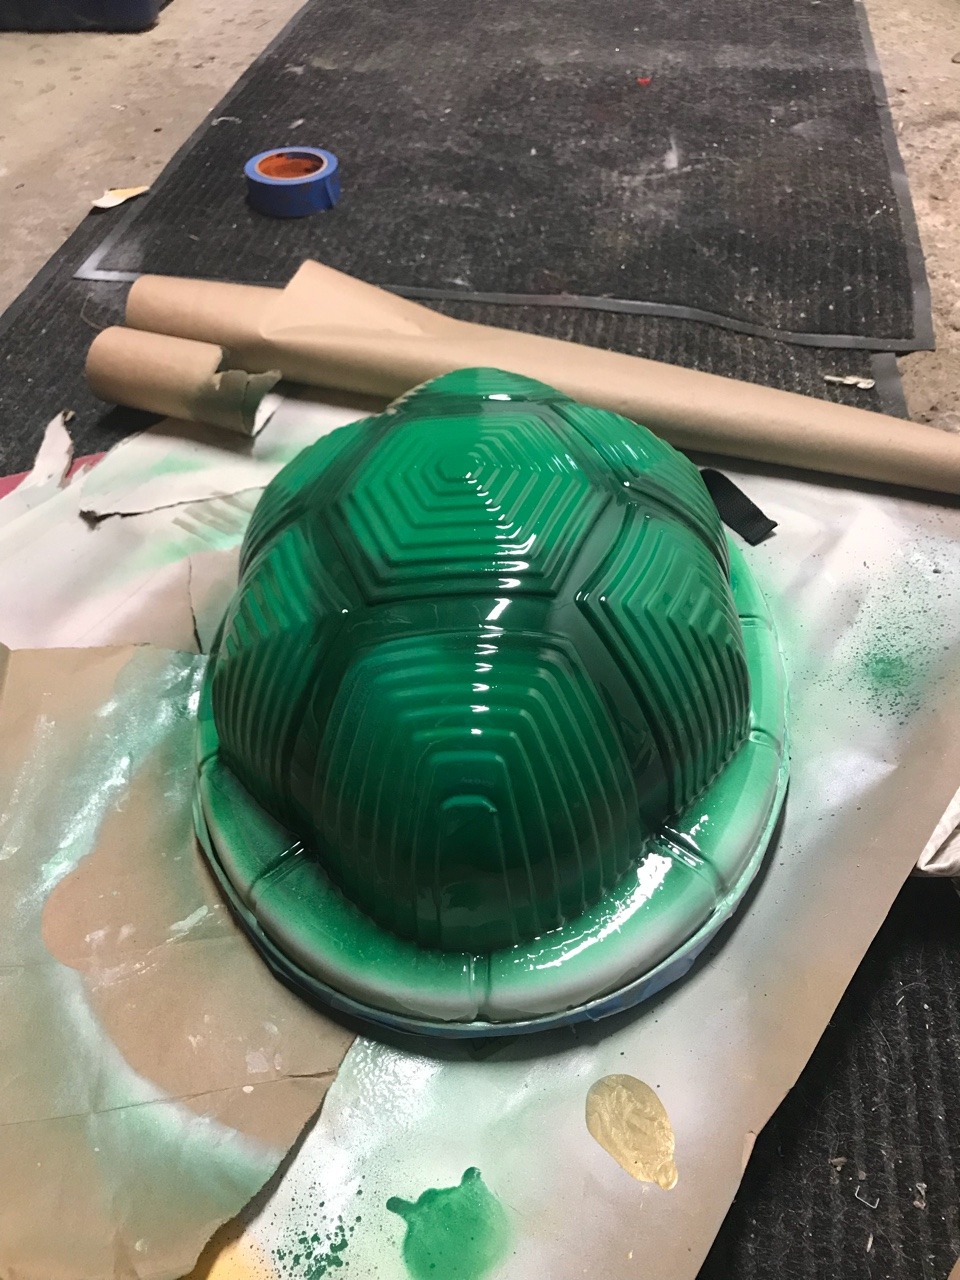 Got a tmnt backpack on amazon for bowsette. Currently repainting before attacking